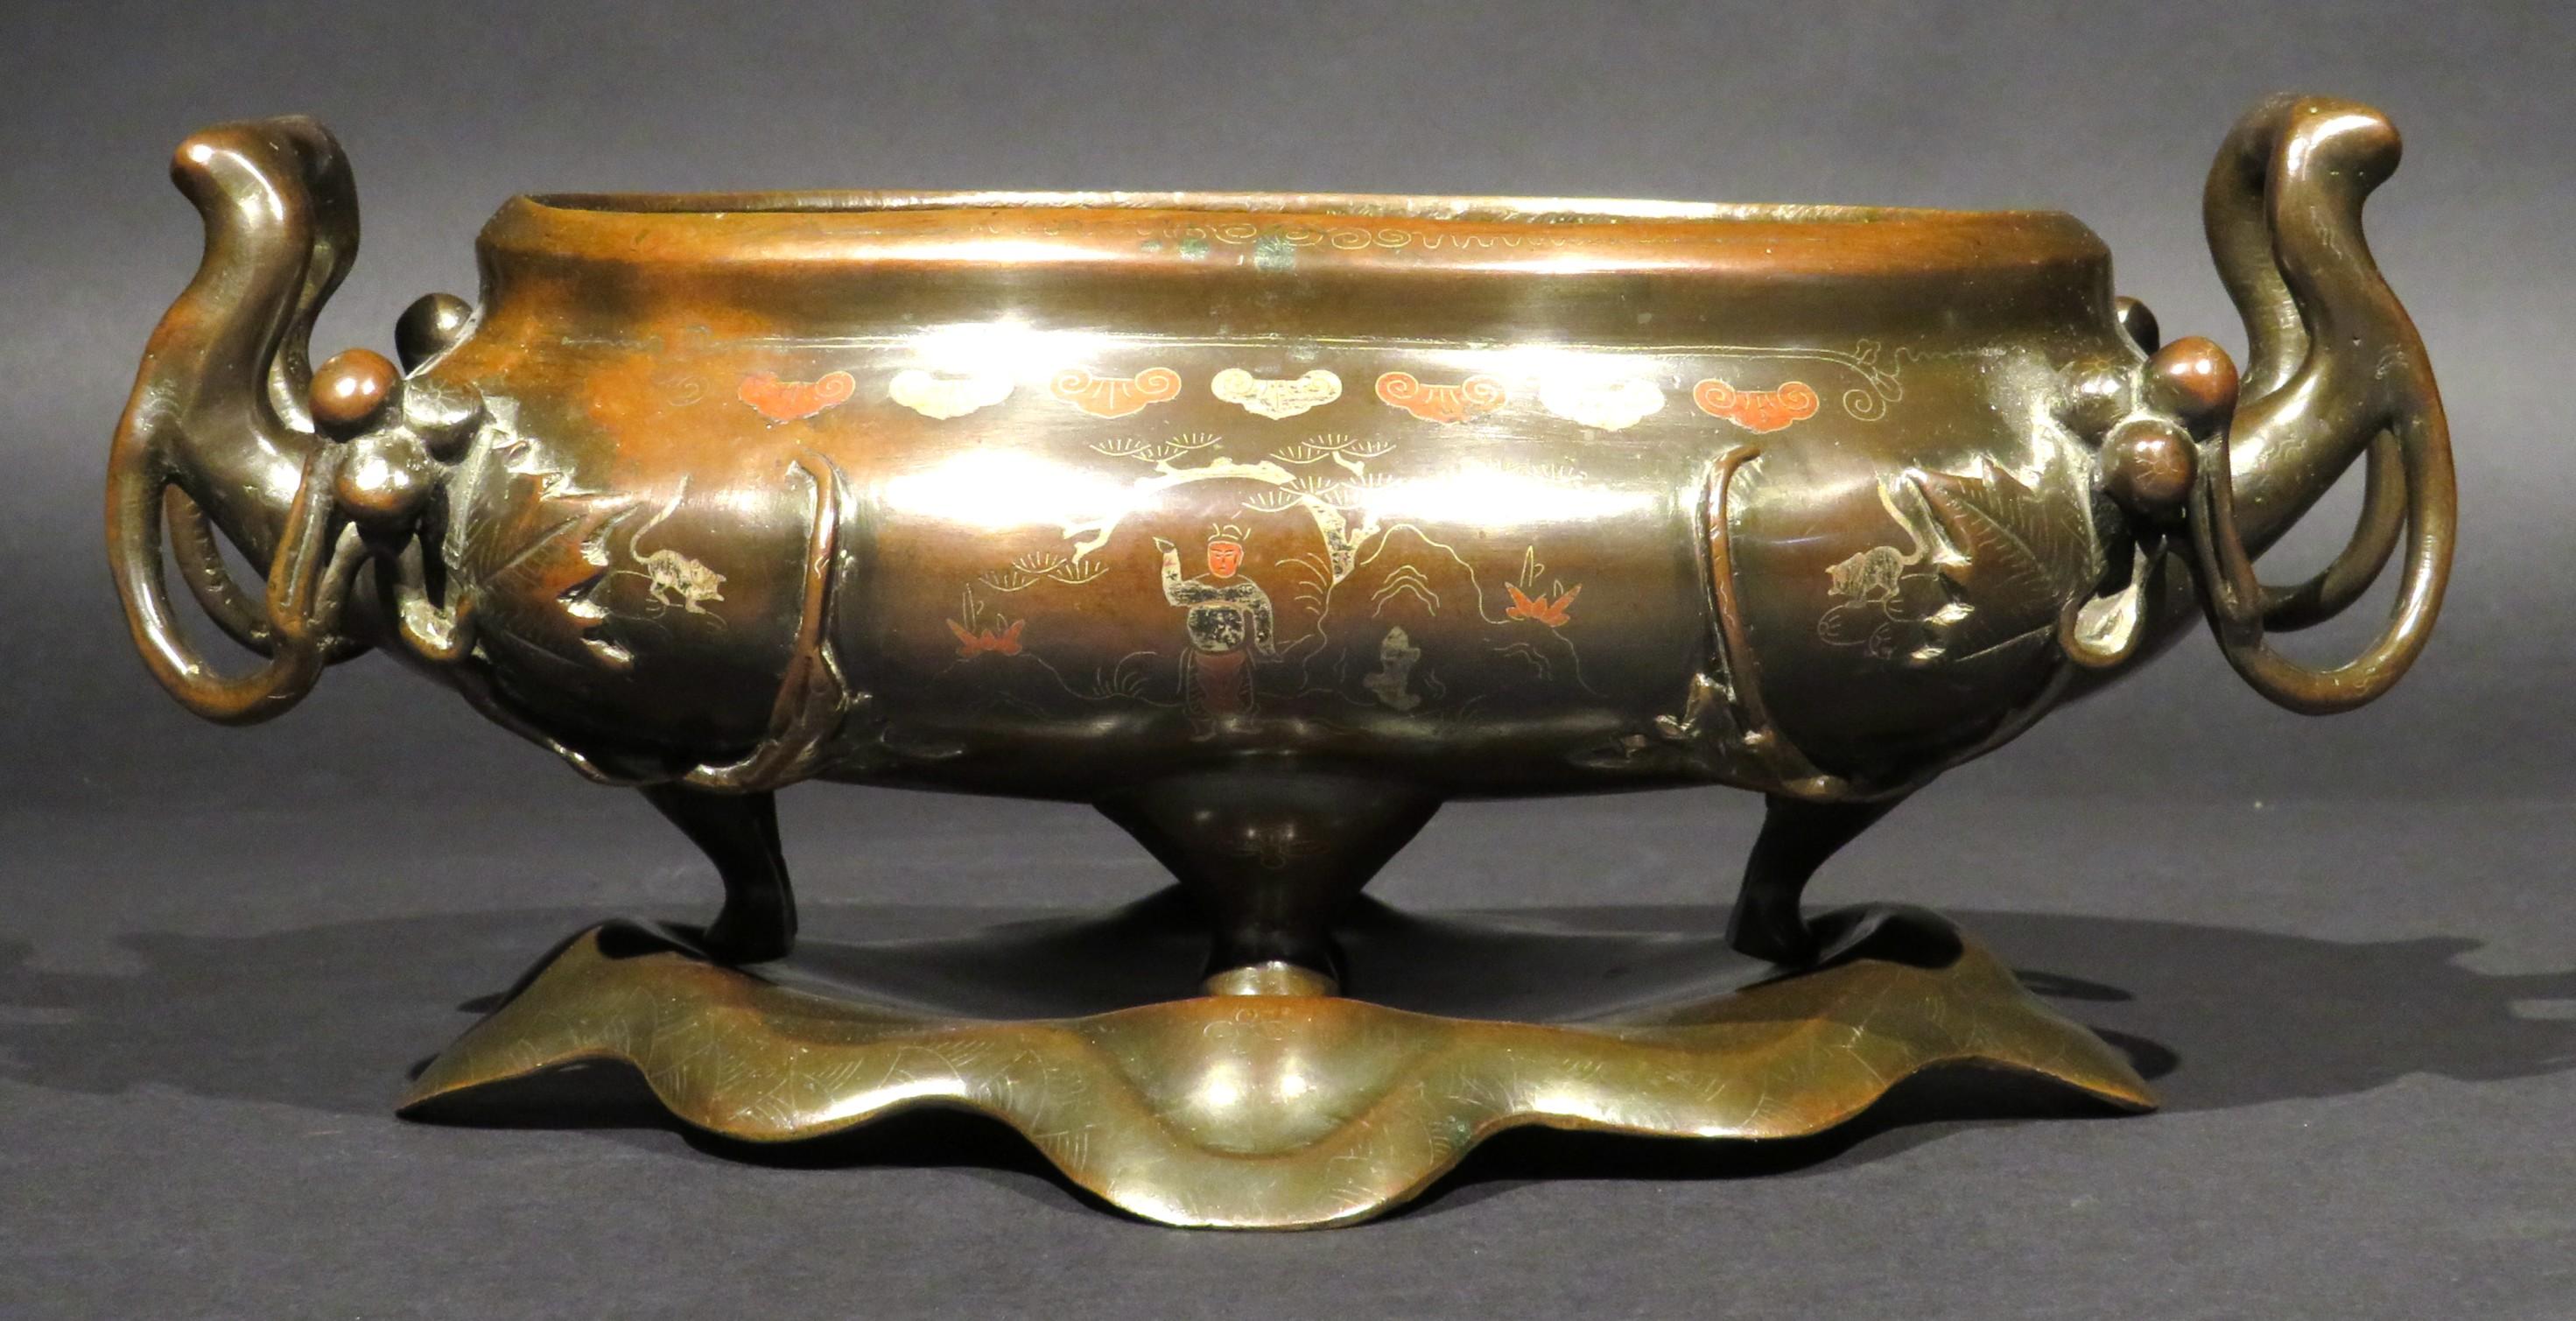 Doban are traditional Japanese bronze vessels used to display scholarly objects known as ‘Suiseki’ (water stones), whereas a Suiban is a traditional Japanese vessel made of wood or ceramic but also sometimes in bronze, which are used to display